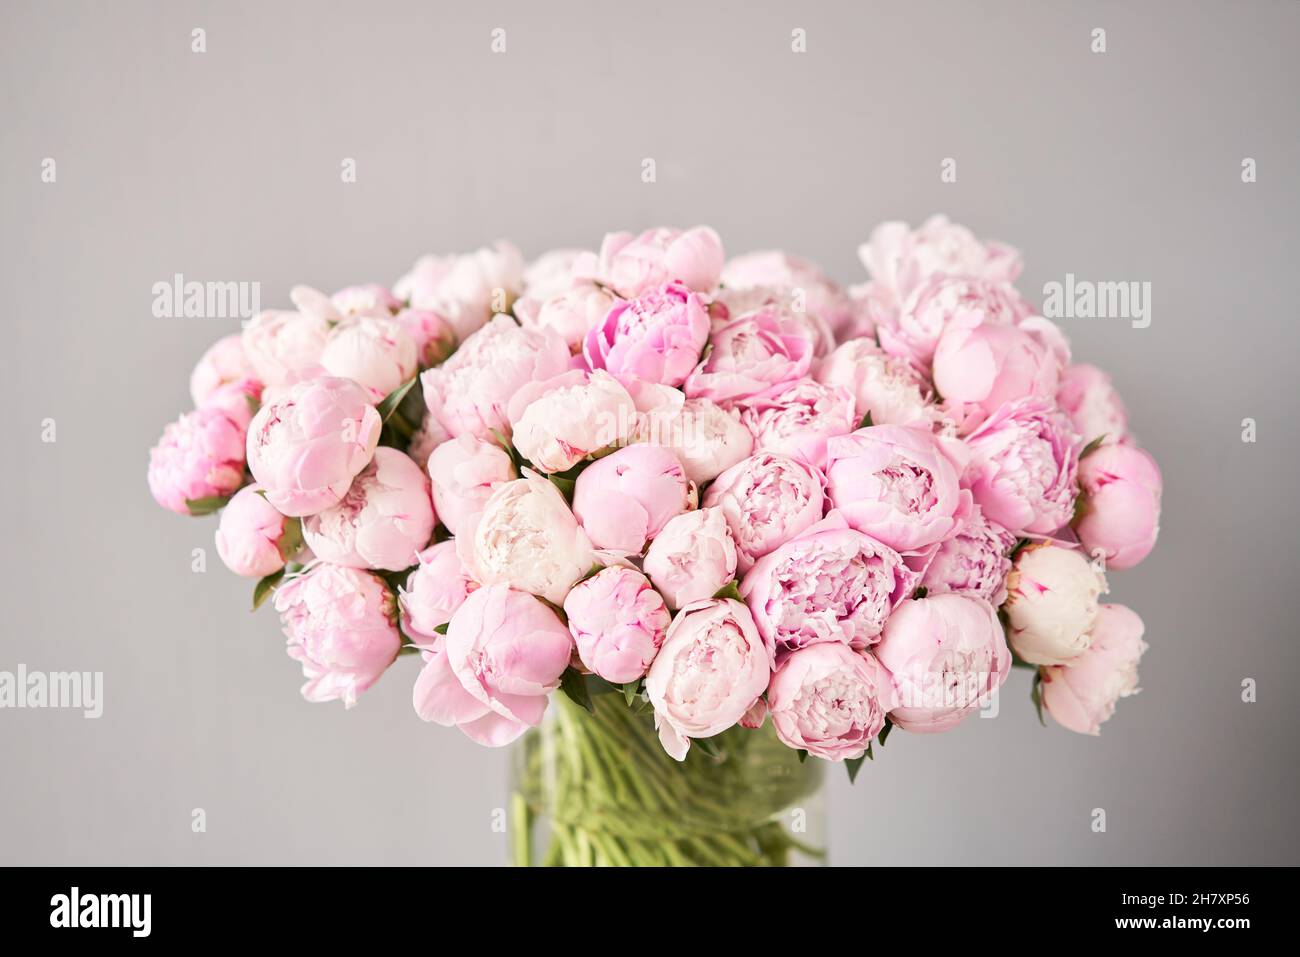 Cute and lovely peony. many layered petals. Bunch pale pink peonies flowers light gray background. Wallpaper, Stock Photo